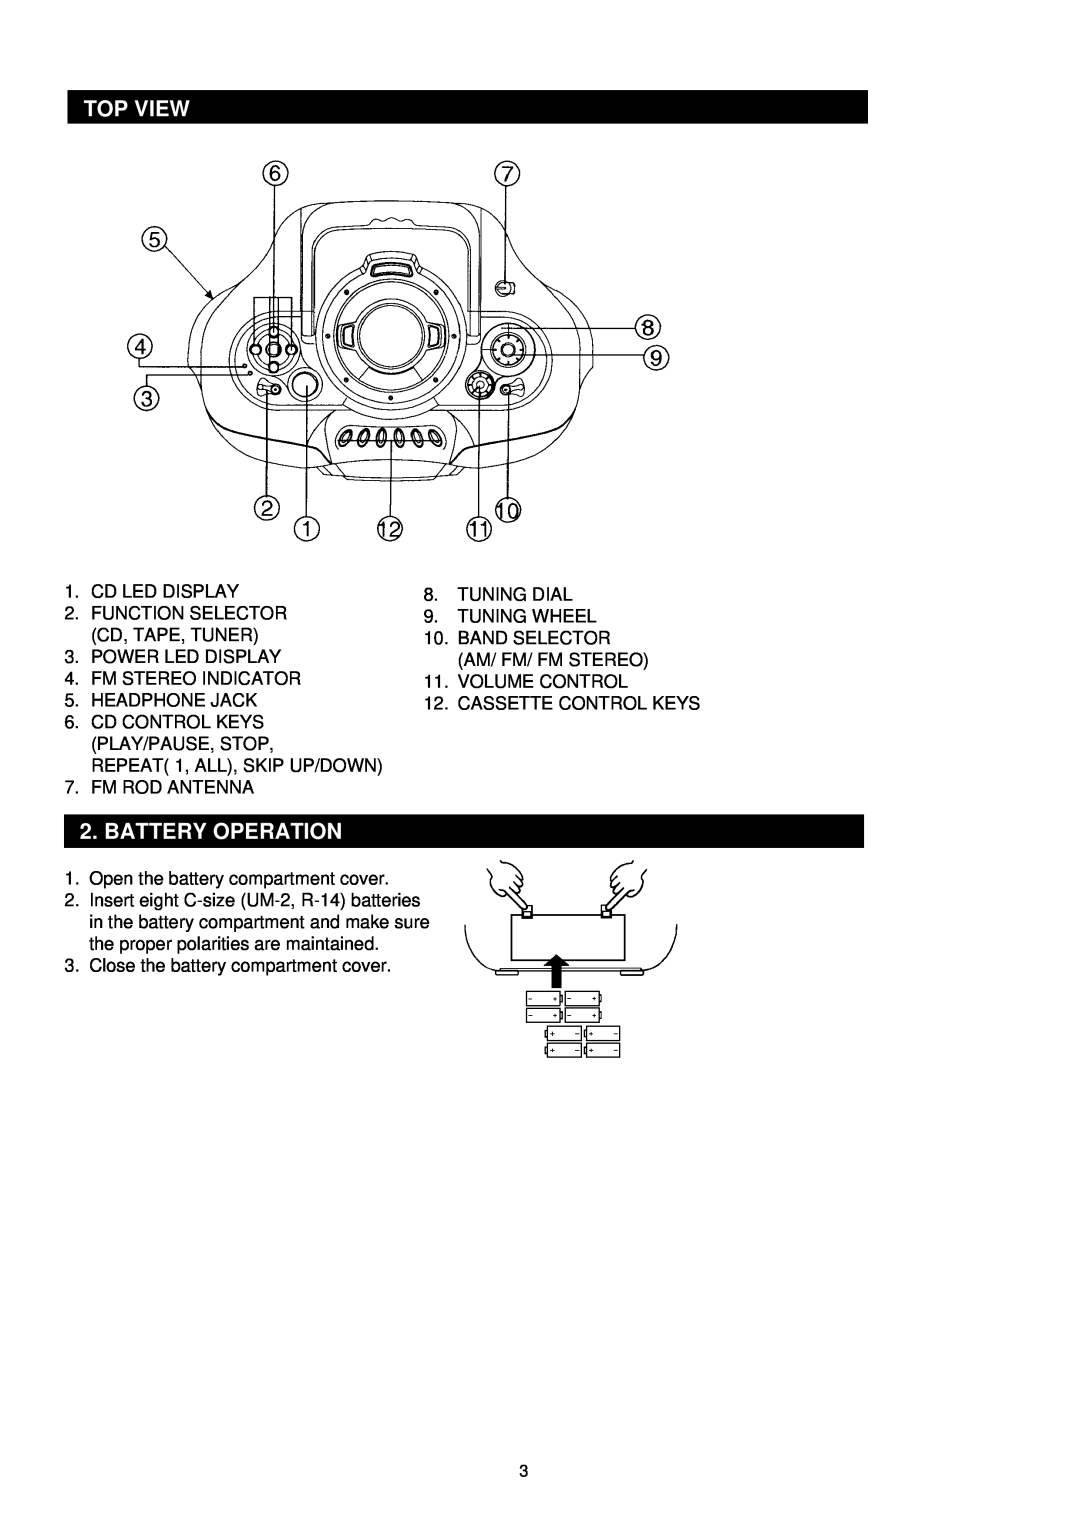 Palsonic PRC-510 instruction manual Top View, Battery Operation 